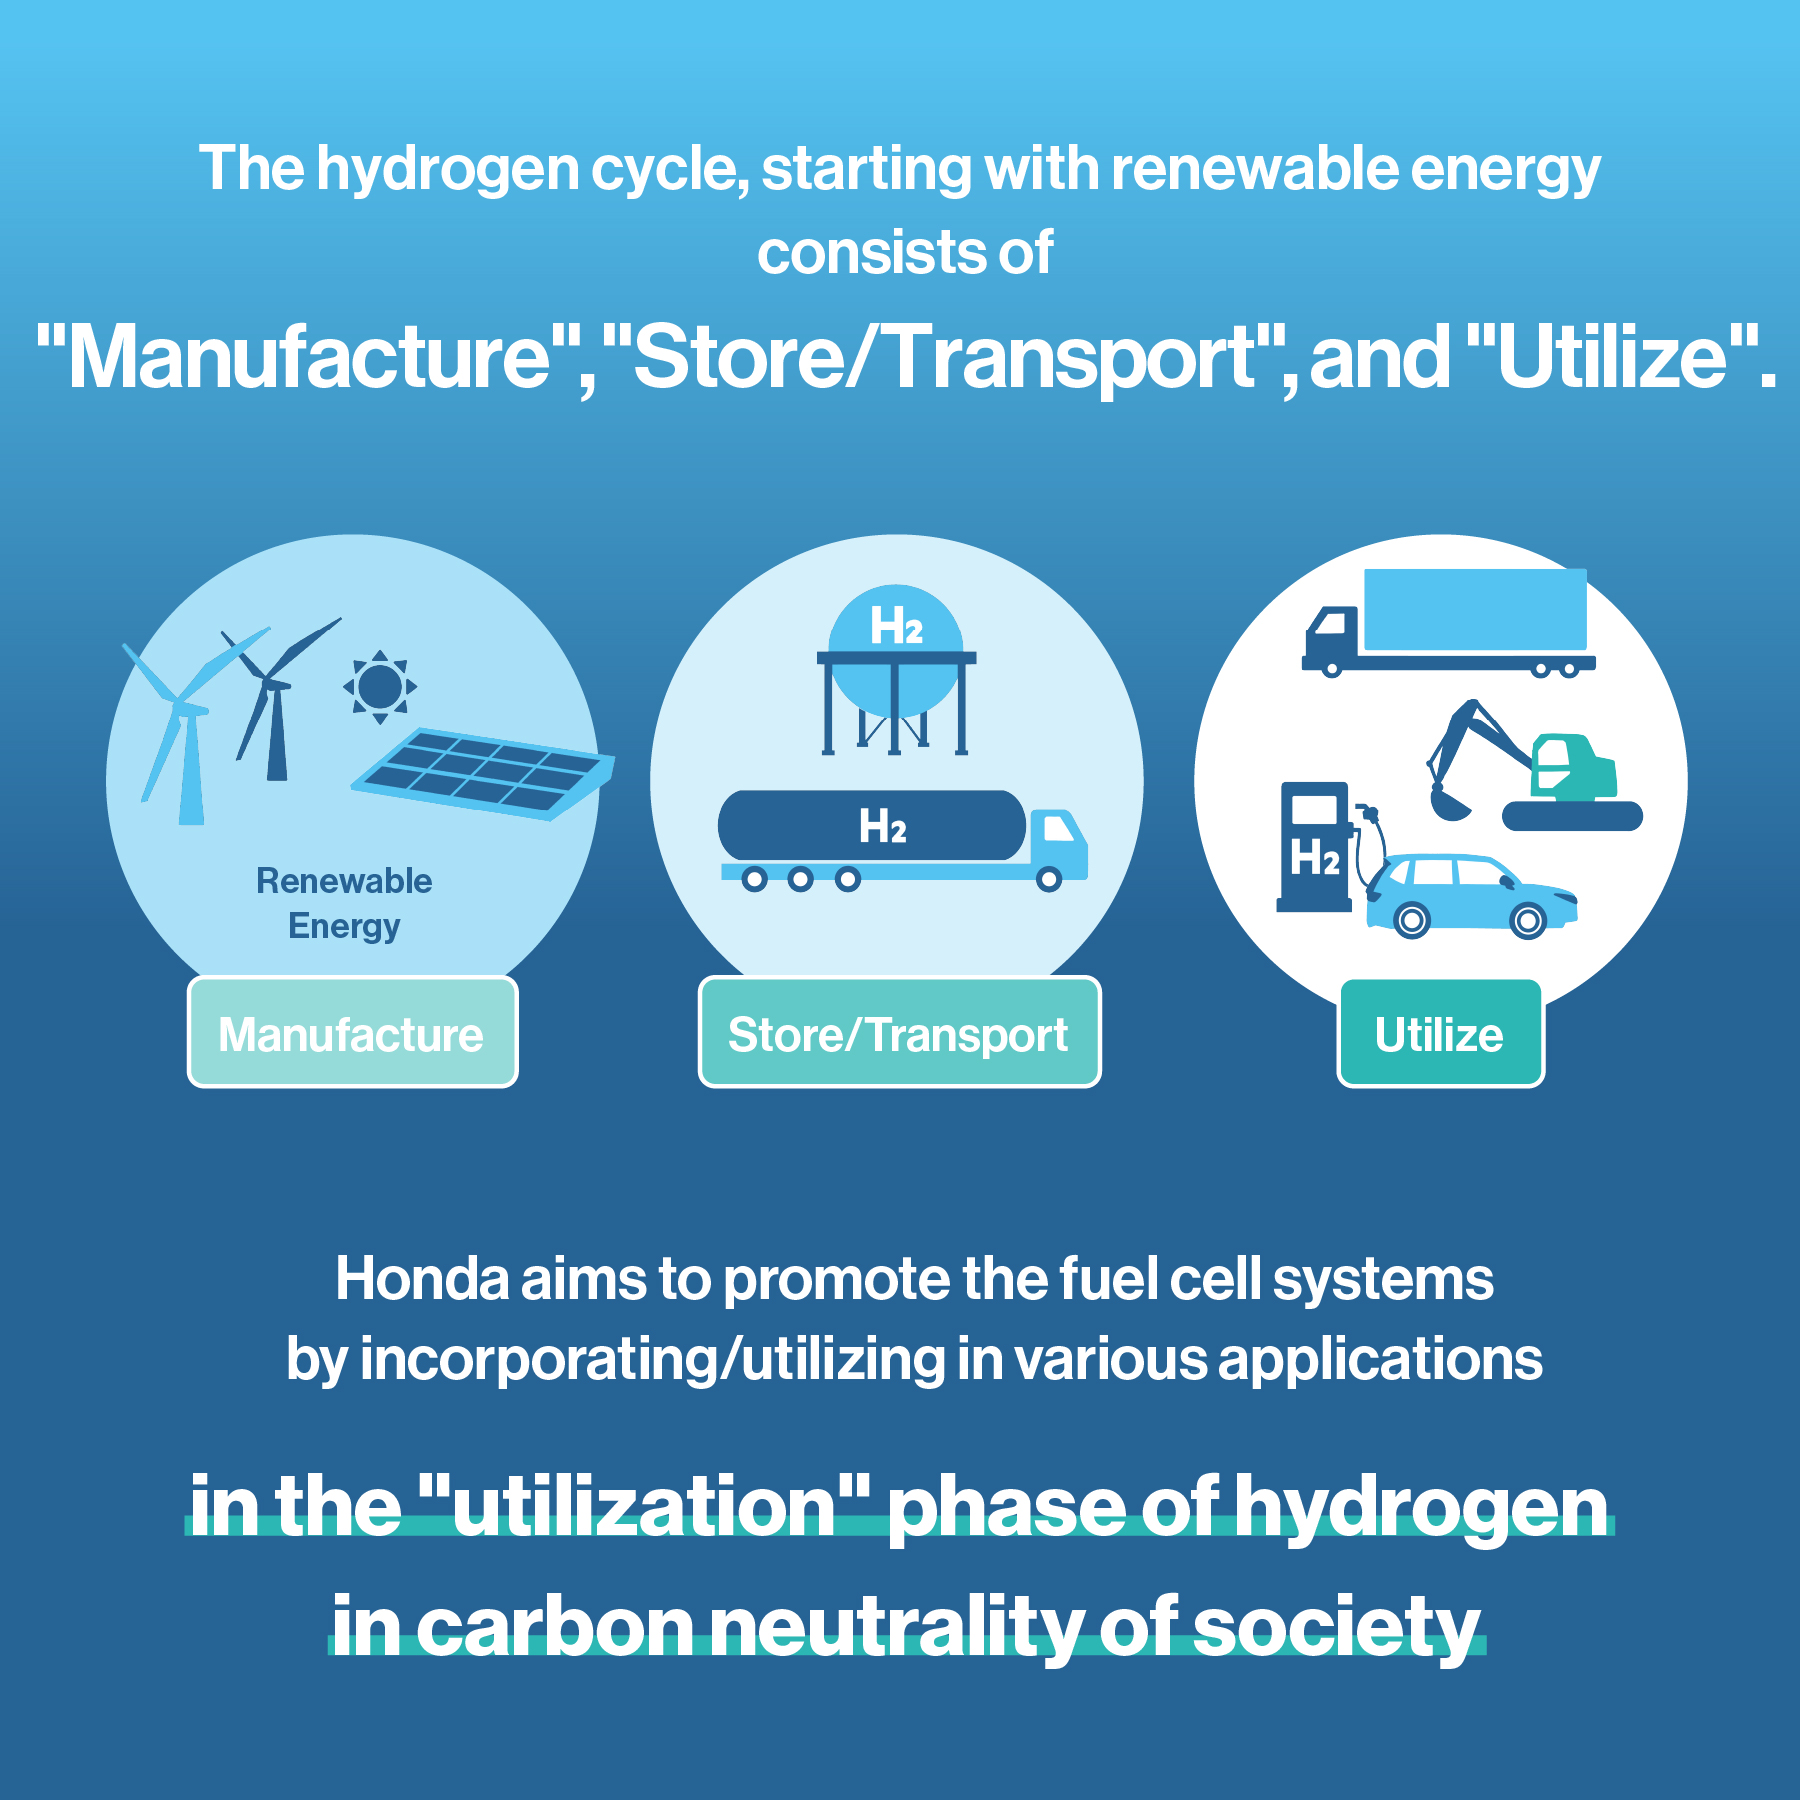 Honda aims to promote the carbon neutrality of society in the &quot;utilization&quot; phase of hydrogen